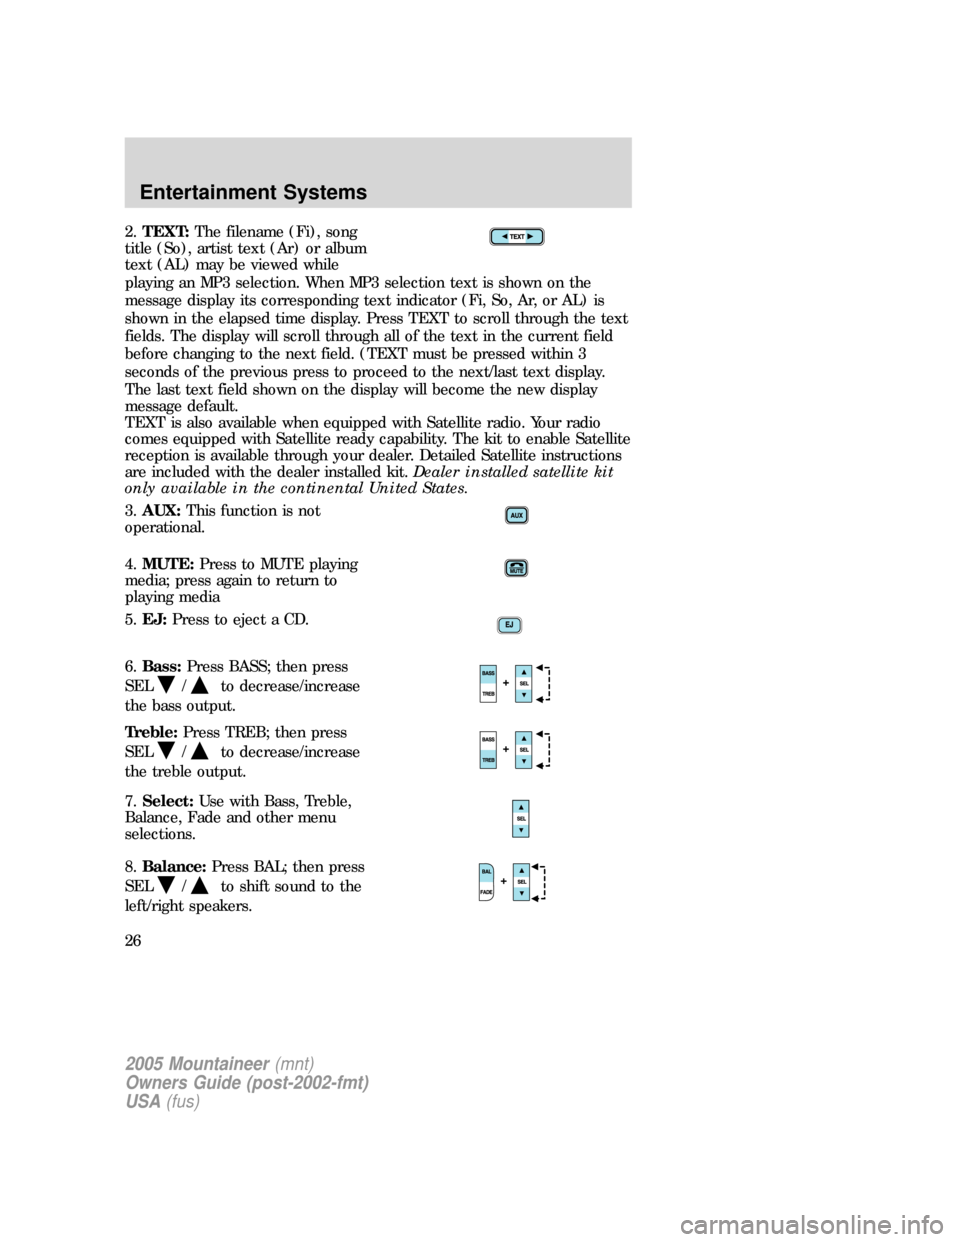 Mercury Mountaineer 2005  Owners Manuals 2.TEXT:The filename (Fi), song
title (So), artist text (Ar) or album
text (AL) may be viewed while
playing an MP3 selection. When MP3 selection text is shown on the
message display its corresponding t